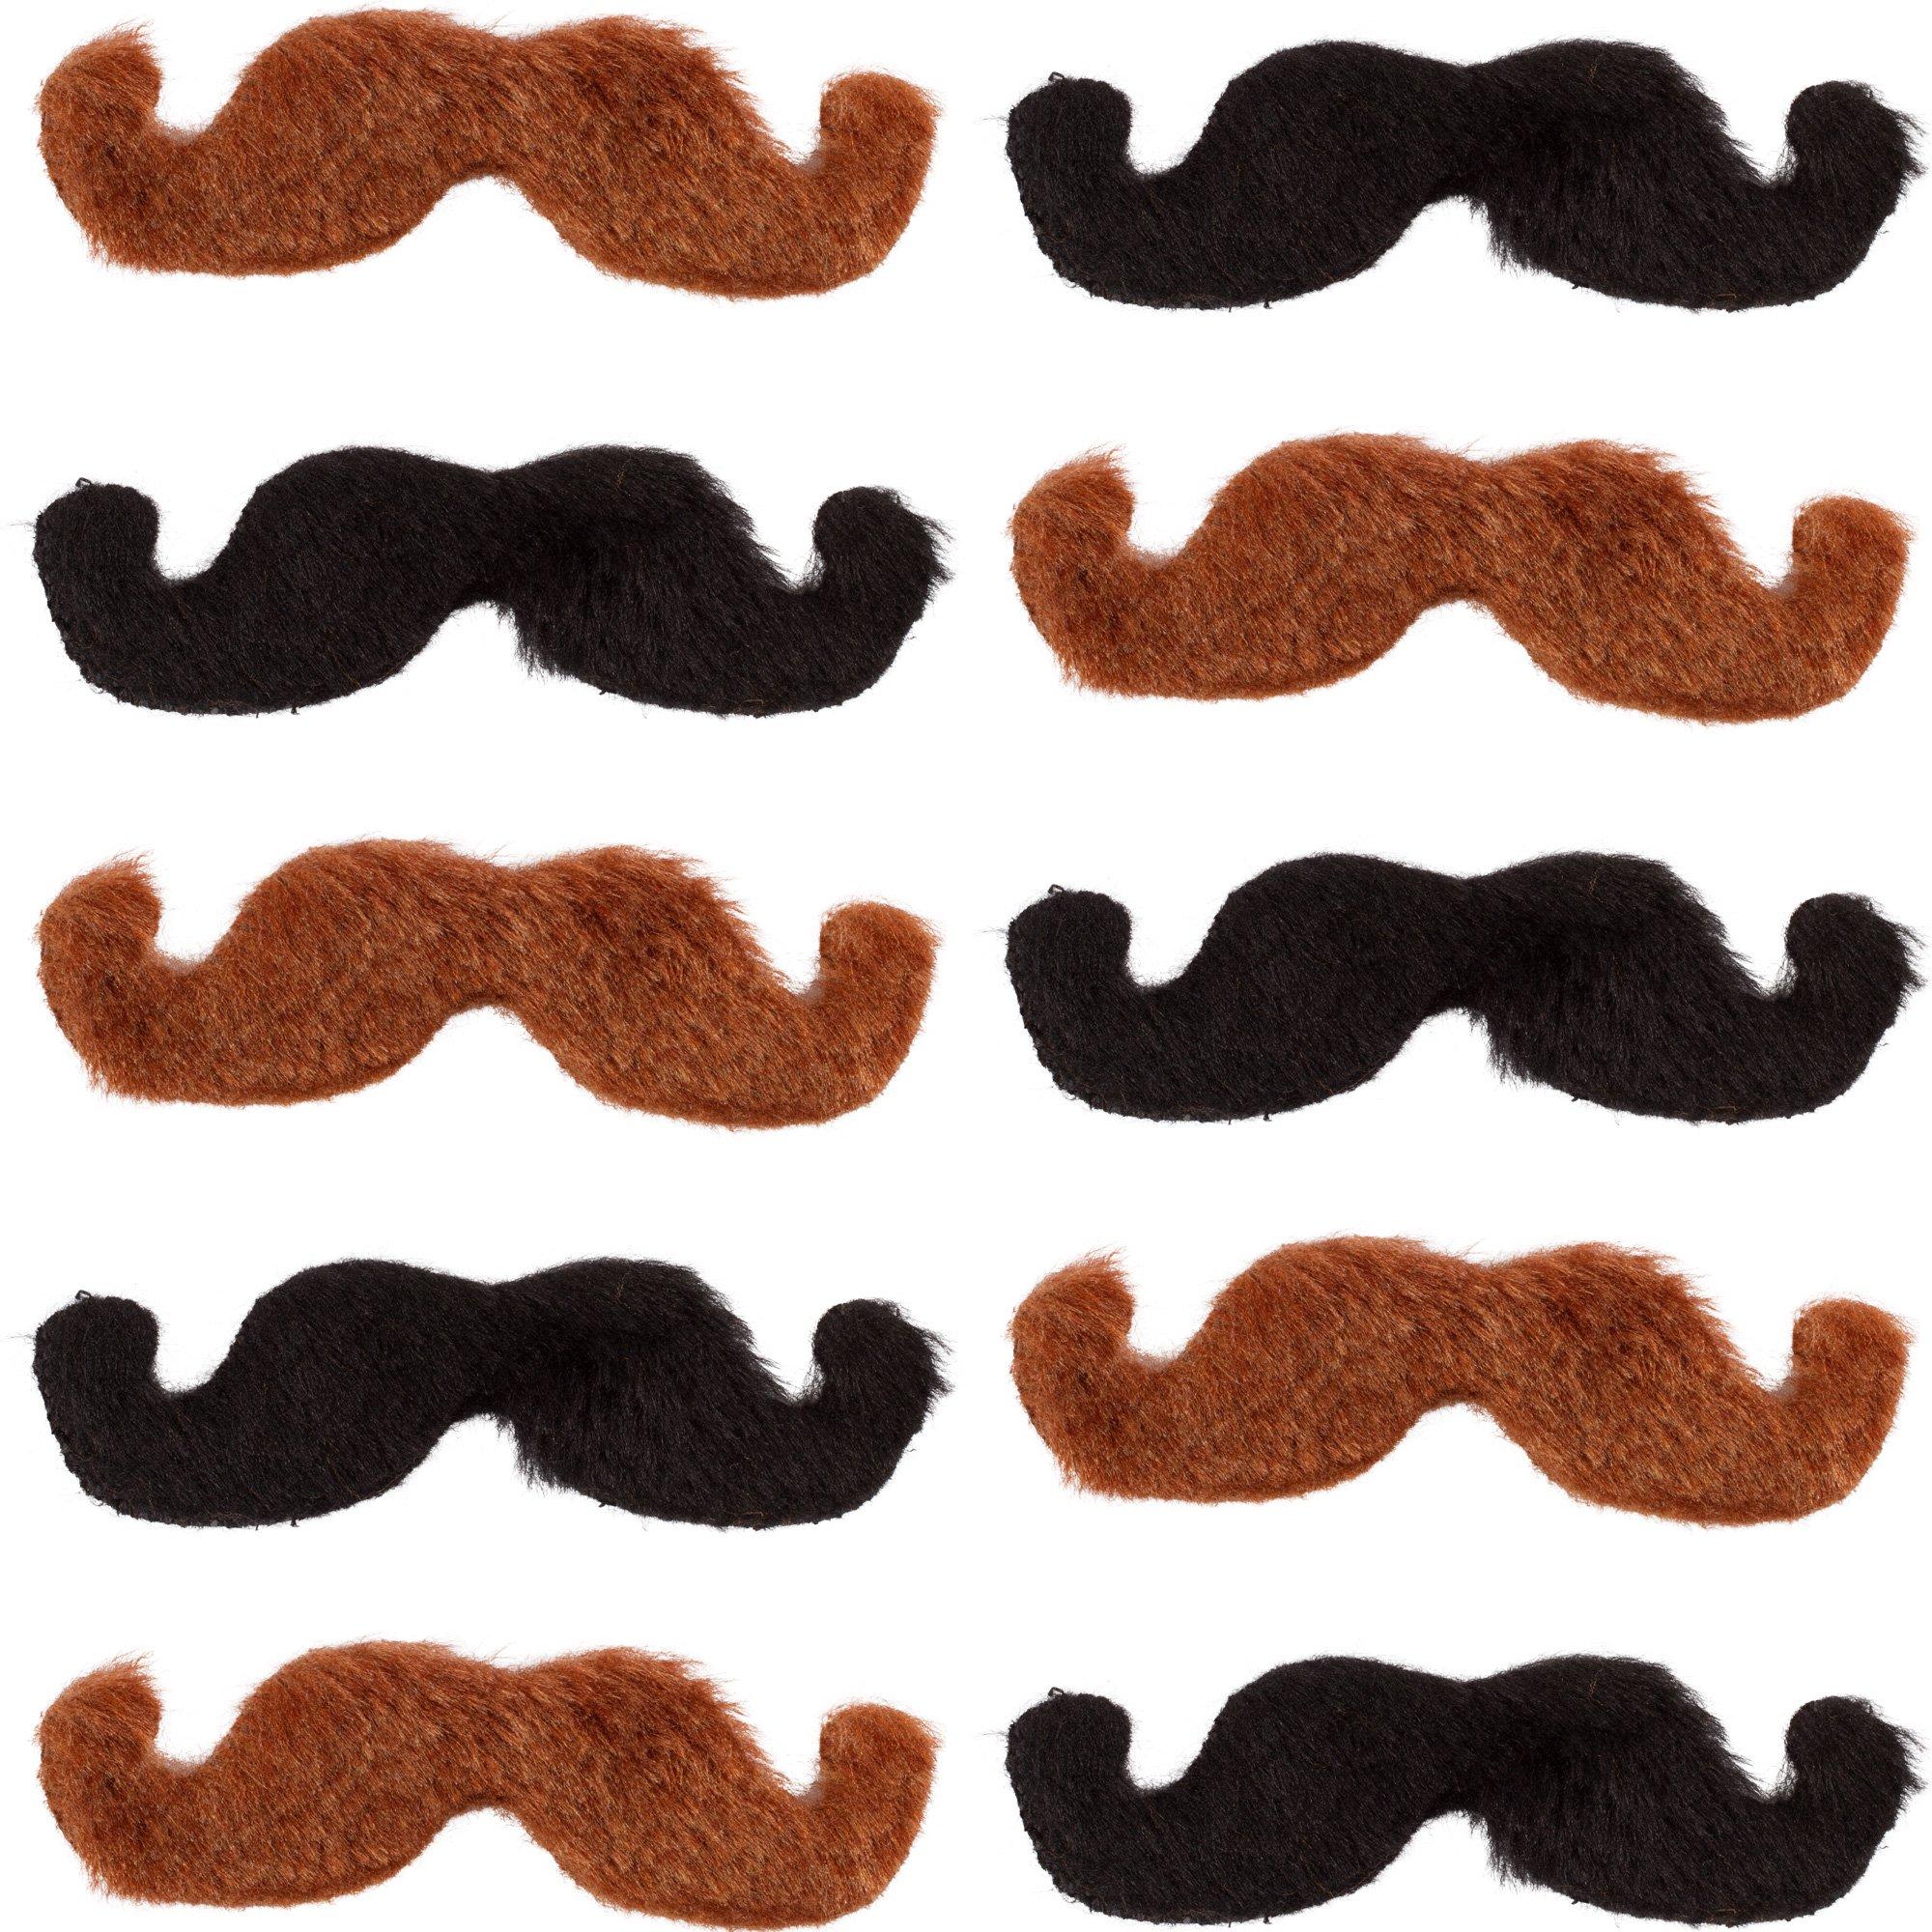 Black & Brown Western Moustaches 10ct | Party City